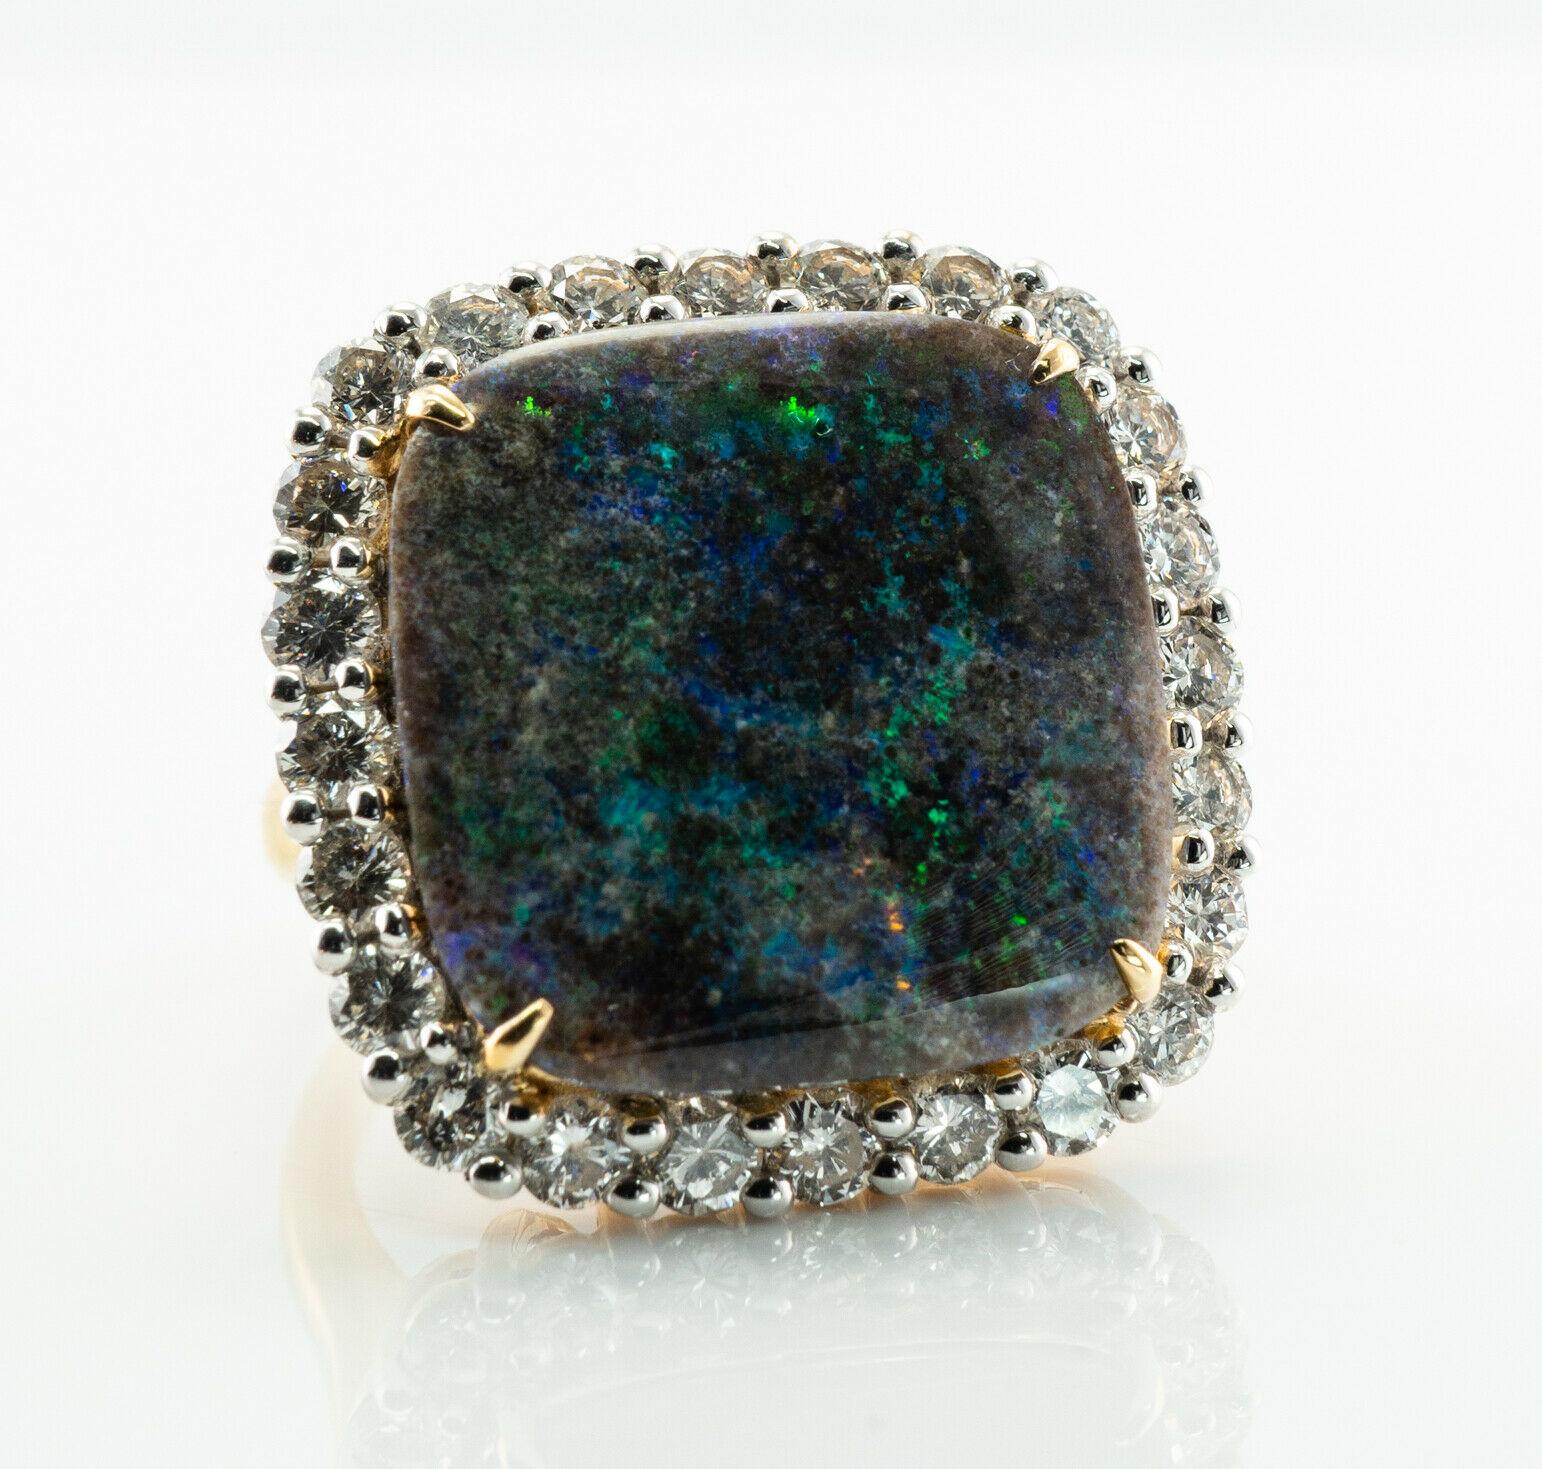 Diamond Black Opal Ring 14K Gold Cocktail Vintage

This stunning vintage ring is finely crafted in solid 14K Yellow Gold (stamped and guaranteed), and it is set with genuine Black Opal and diamonds. The center square Opal cabochon measures 18mm x